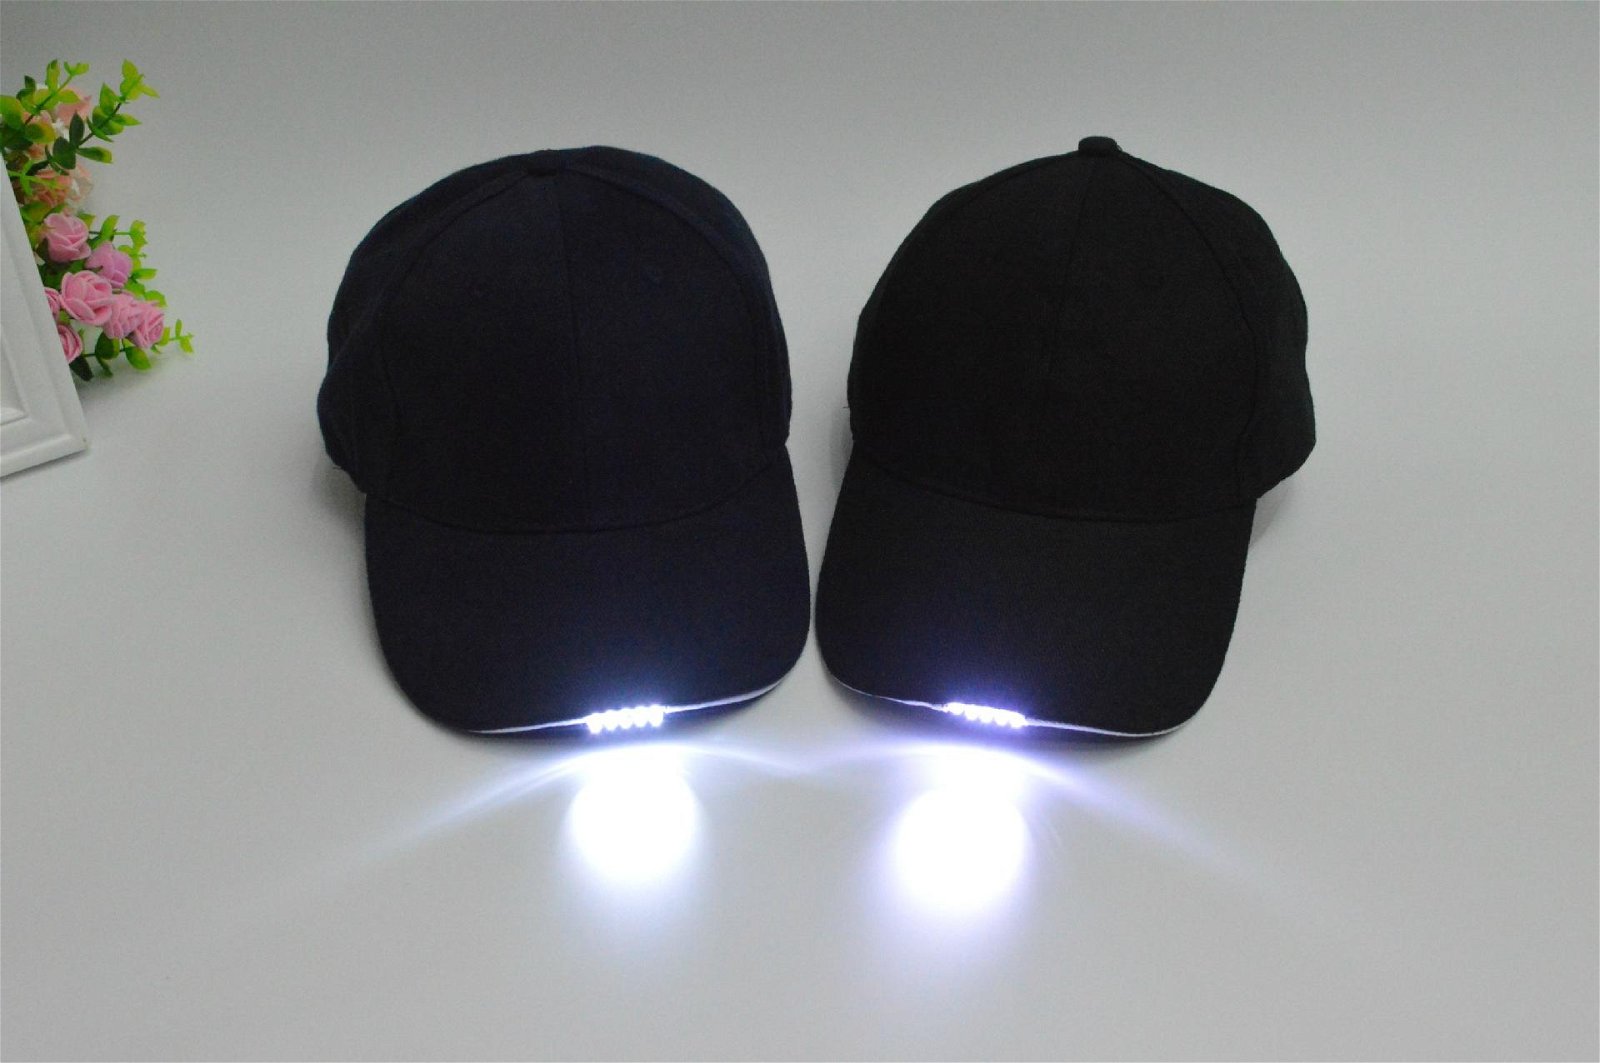 hats with lights built in